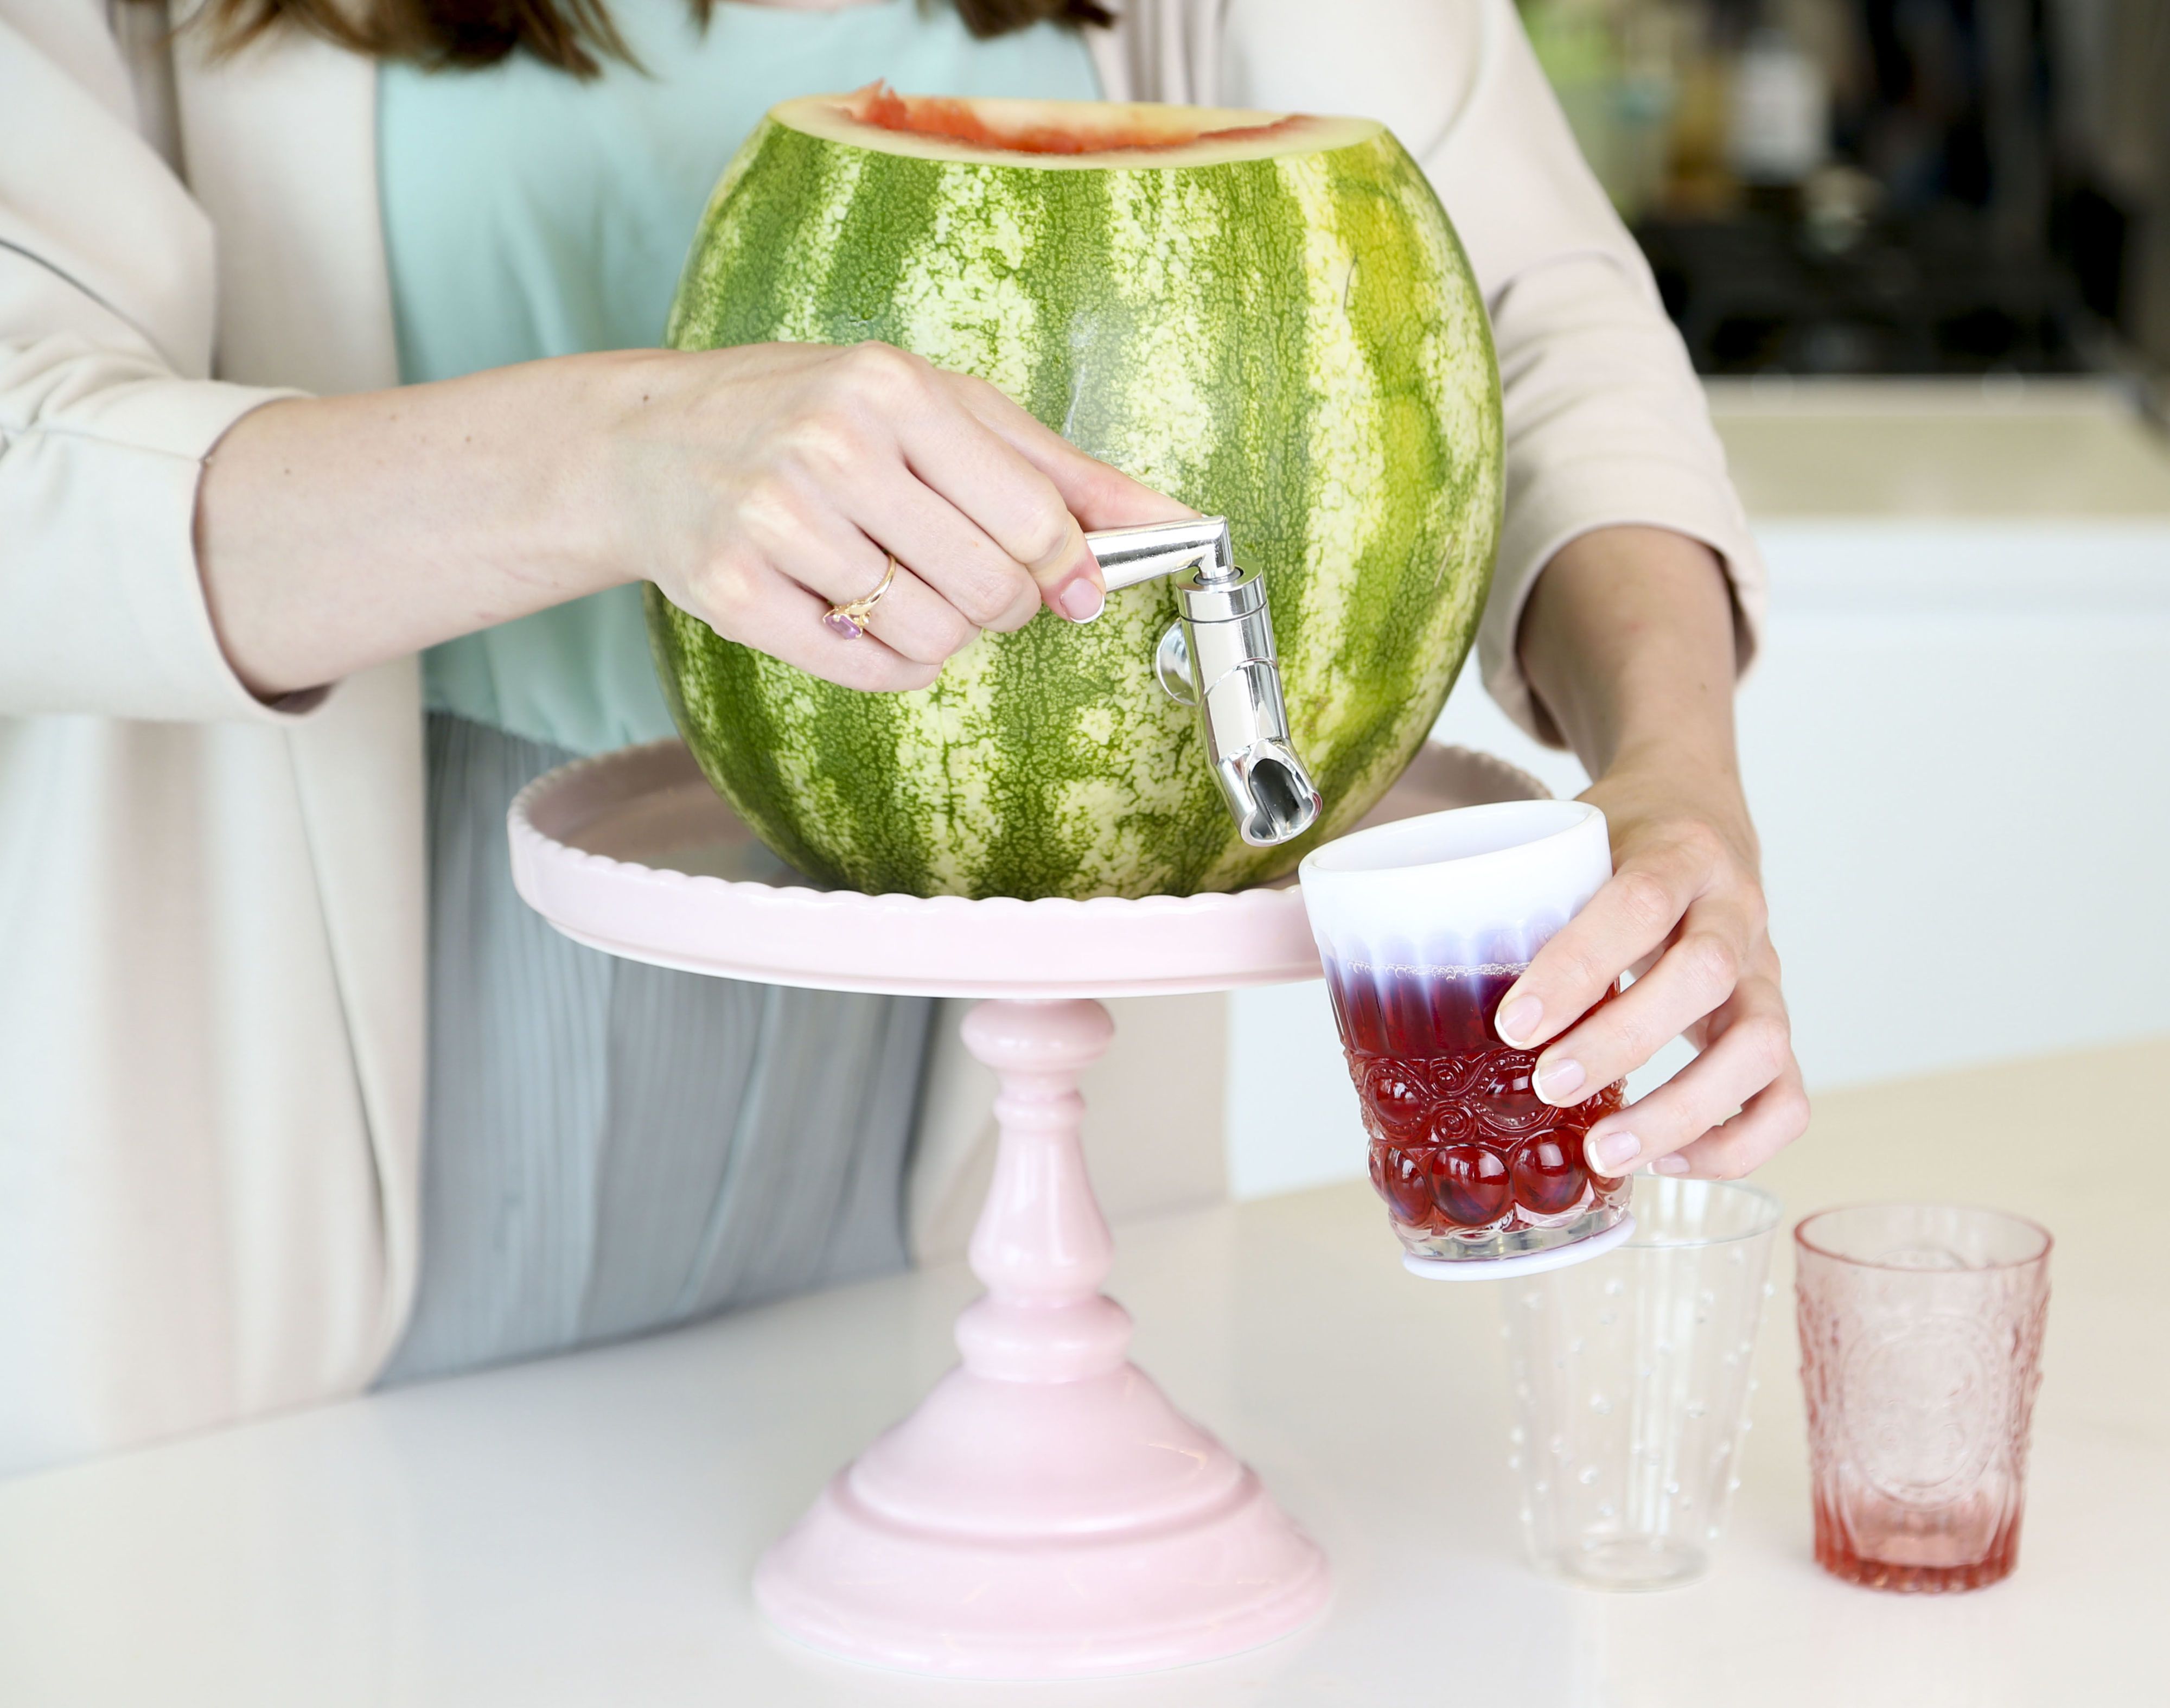 Watermelon keg recipe for July 4th cook out party